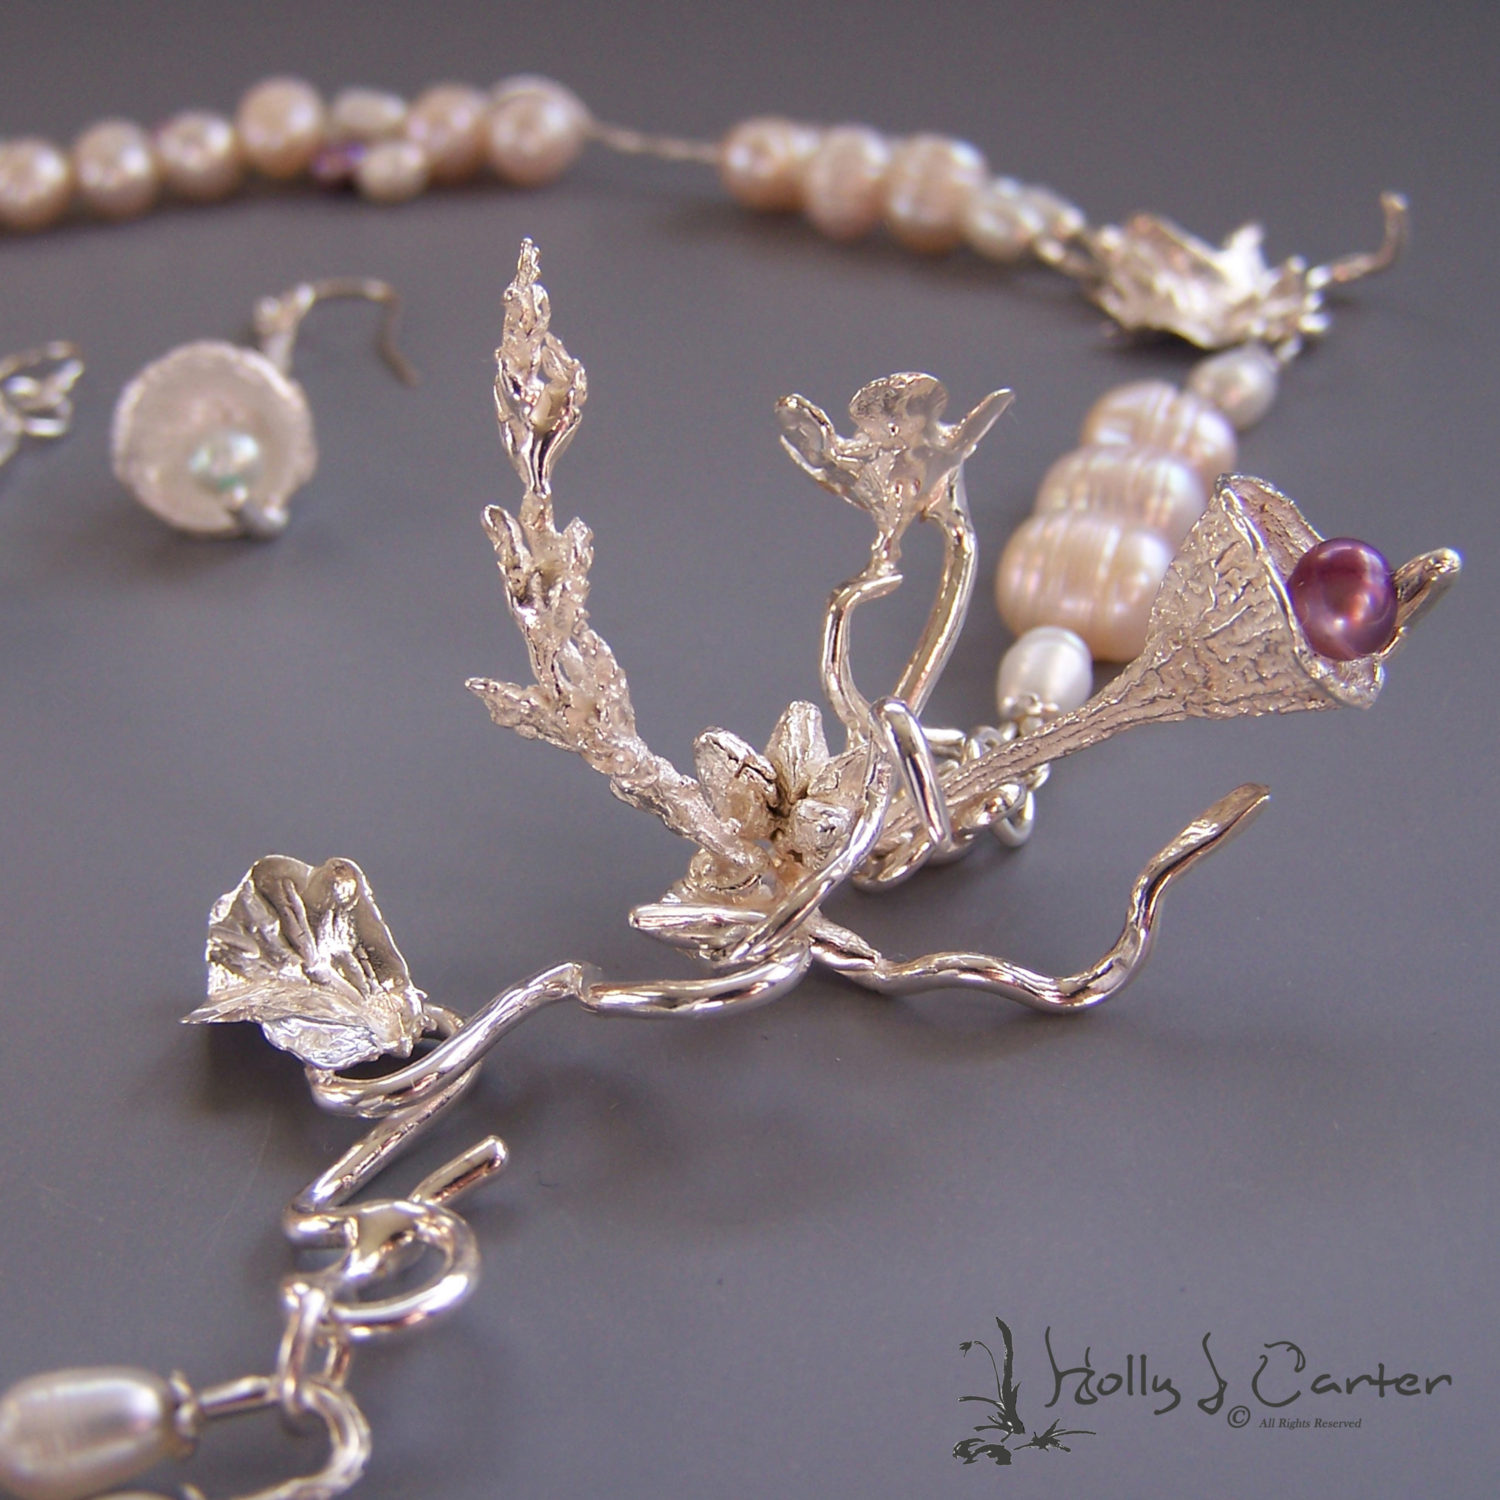 Ethereal Bouquet Necklace and Earrings Set handcrafted by metals artist Holly J. Carter is a stunning and elegant cascade of pearls and sterling organics.